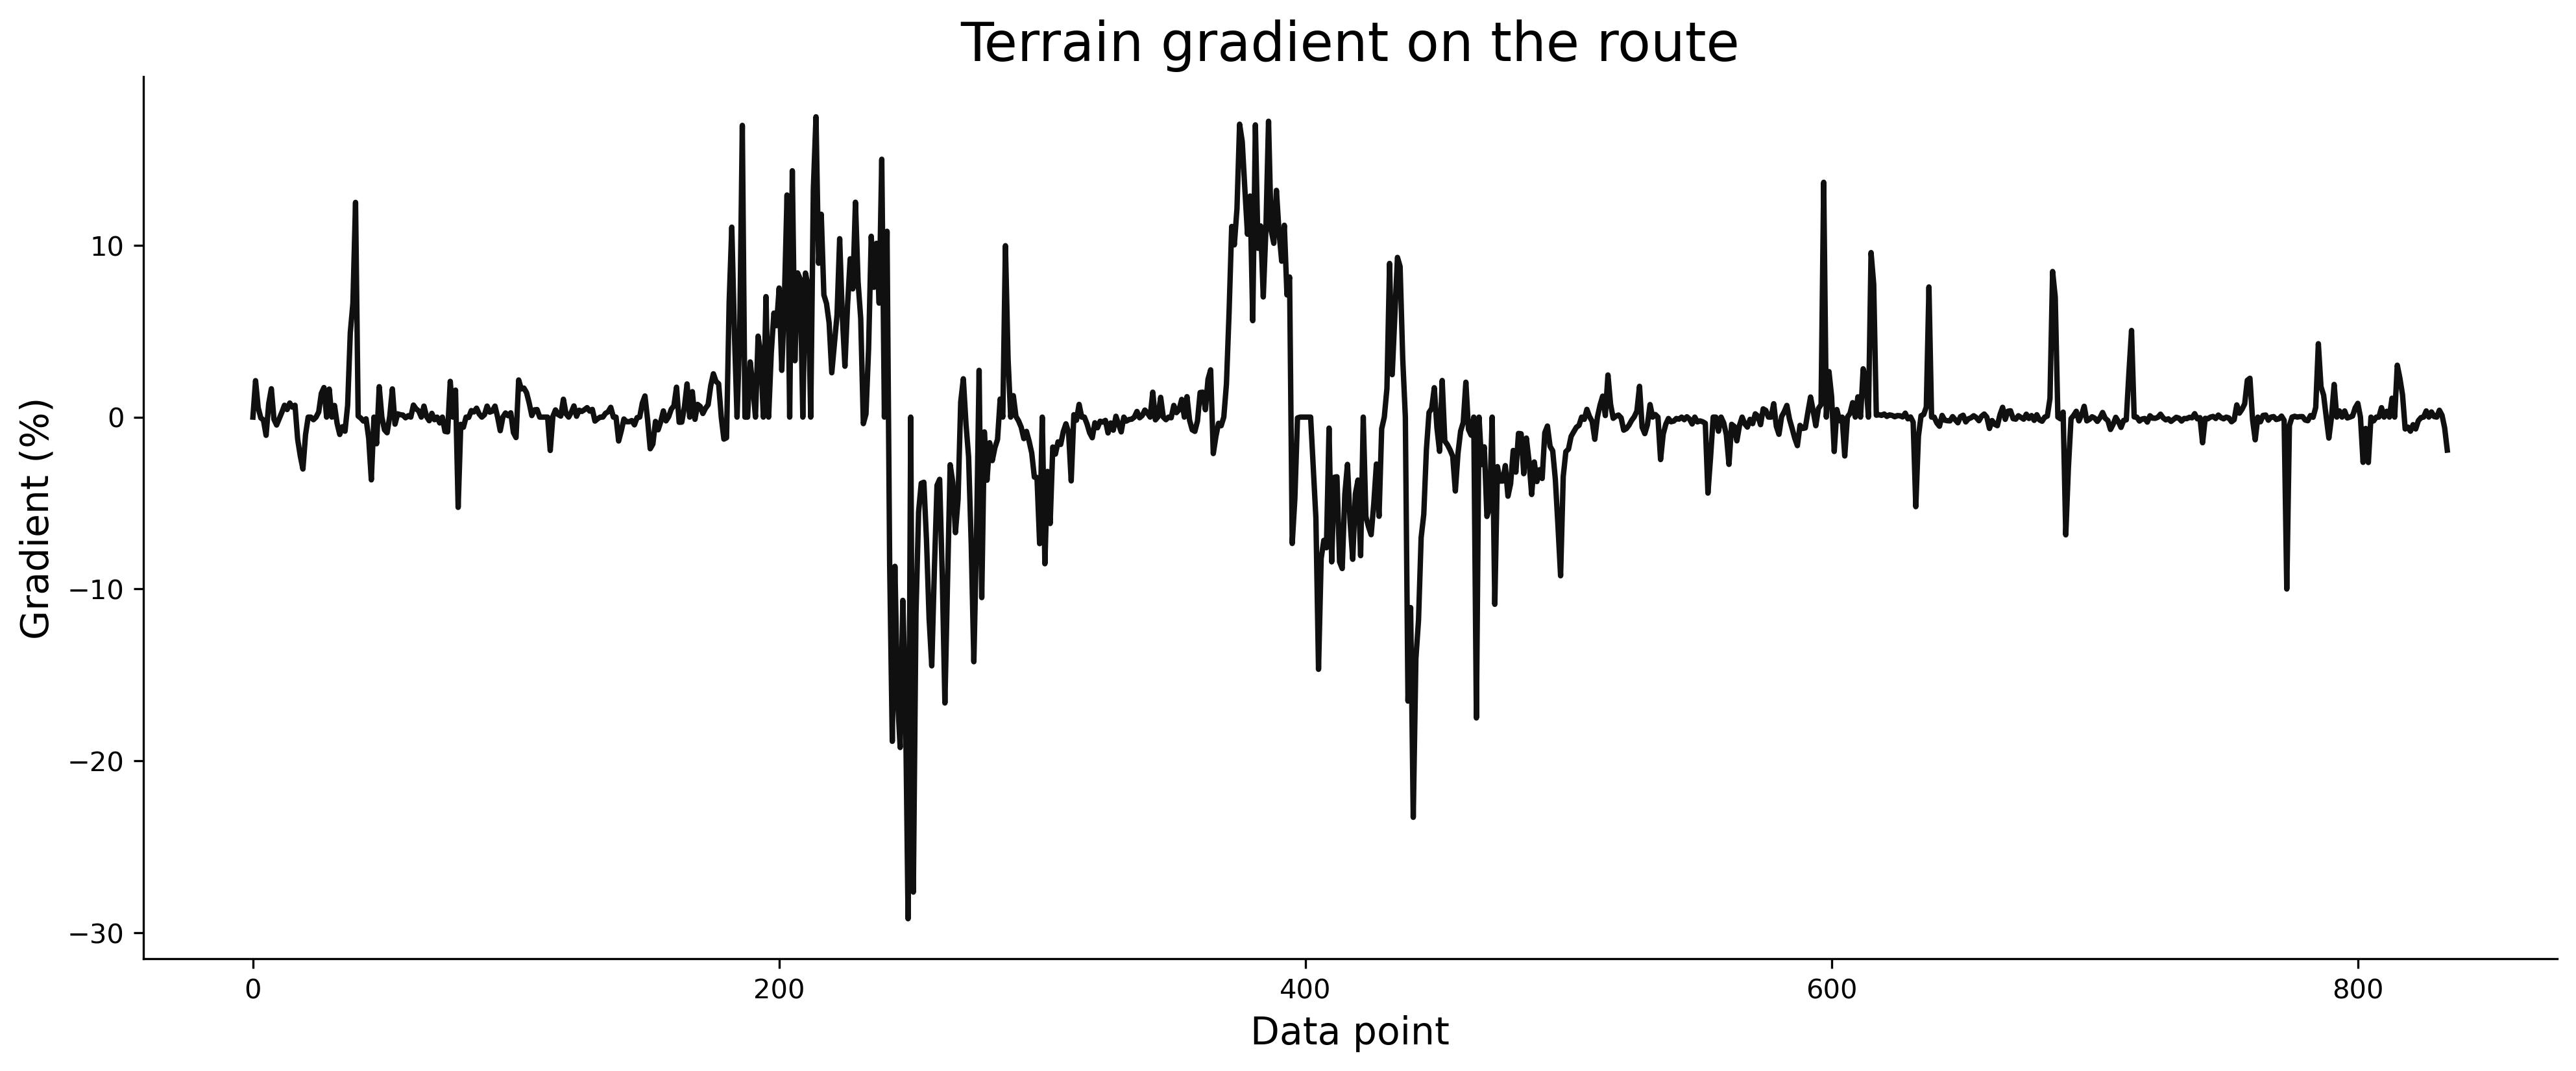 Image 10 - Estimated average route gradient v3 (image by author)